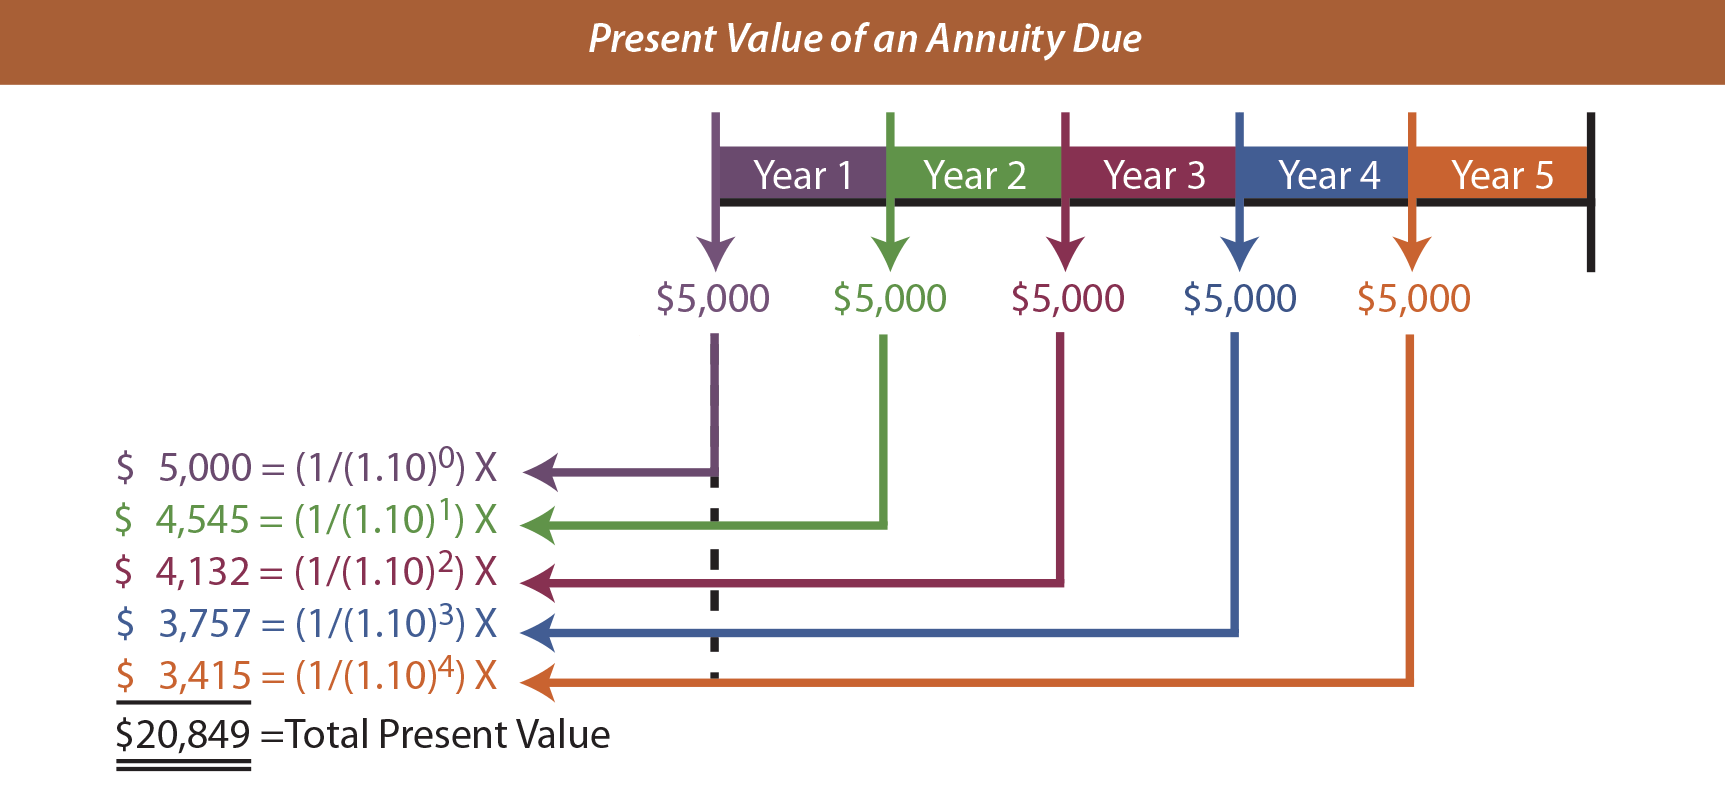 Present Value of an Annuity Due Illustration